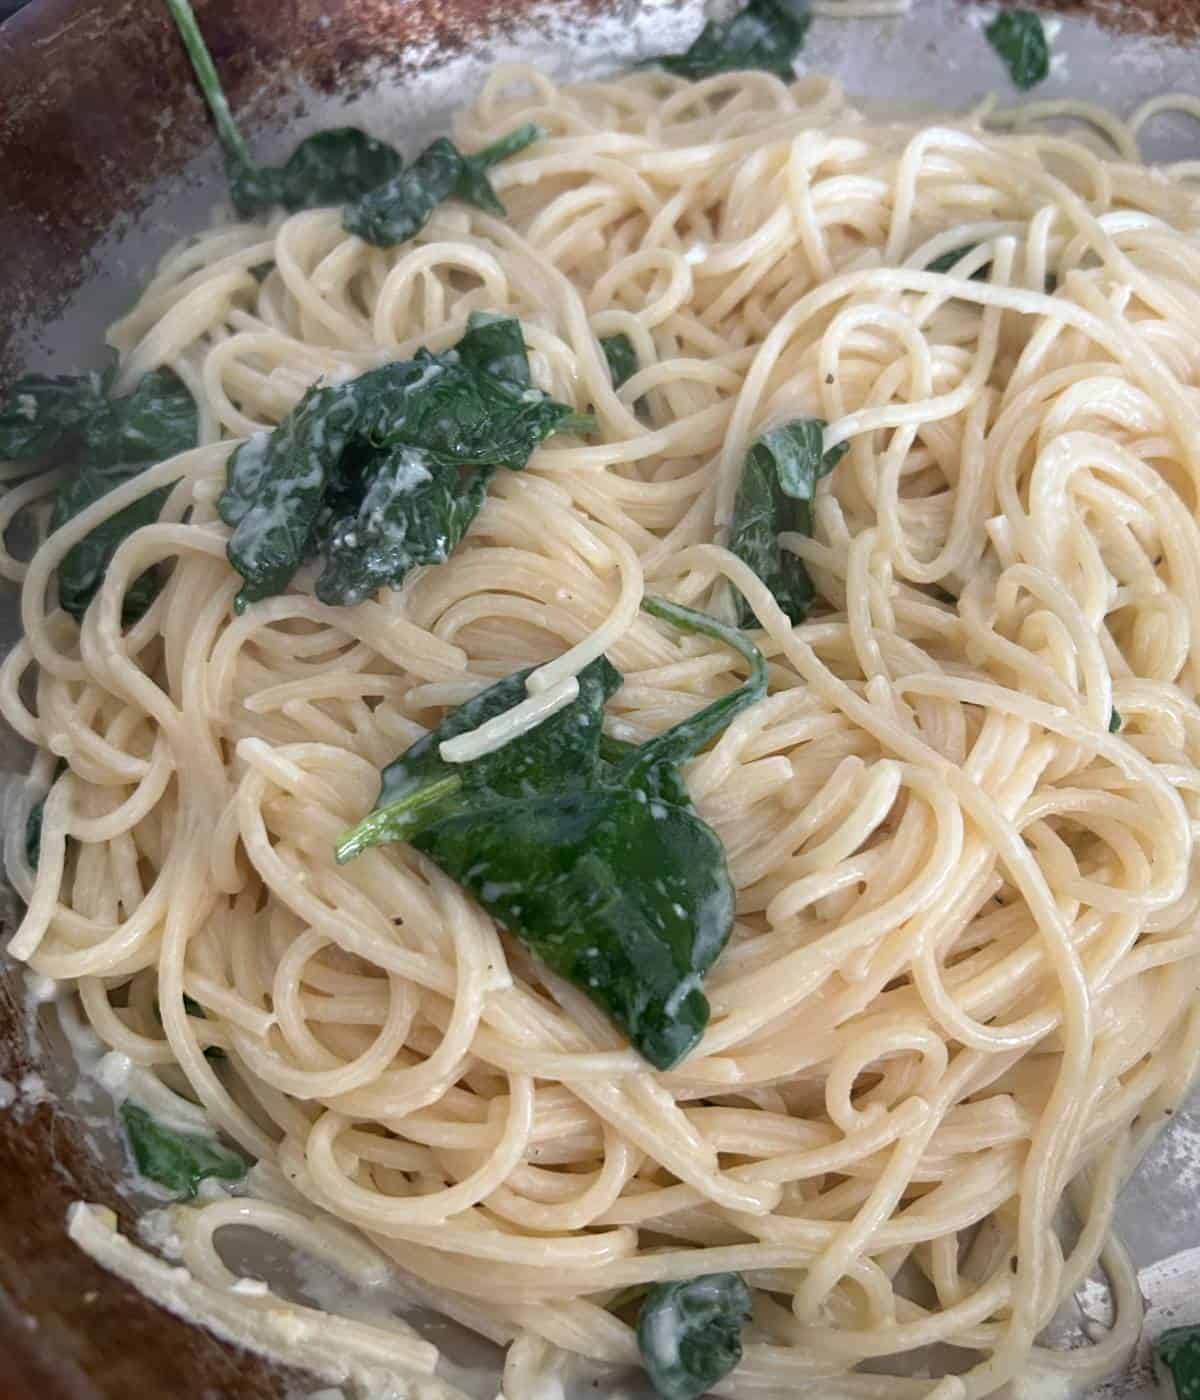 Spaghetti with lemon sauce and spinach.